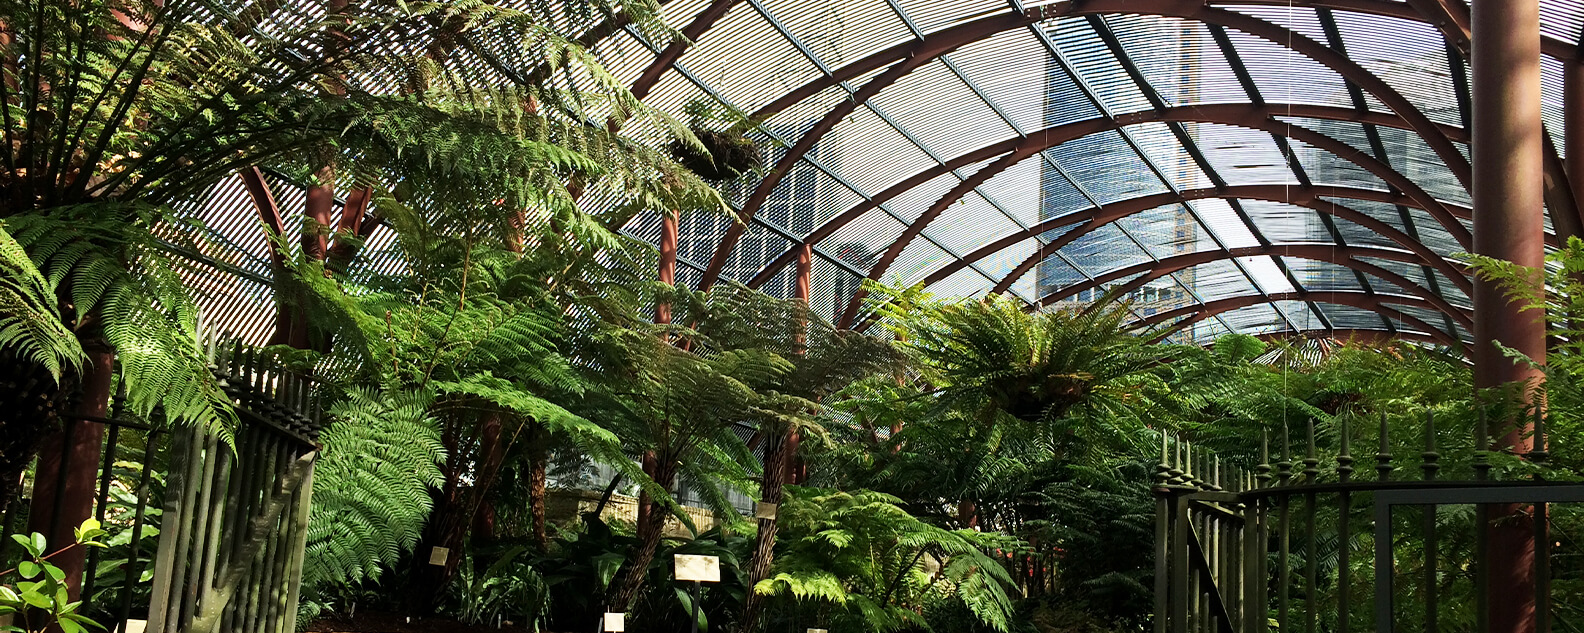 Sheltered garden with domed roof, filled with lush ferns